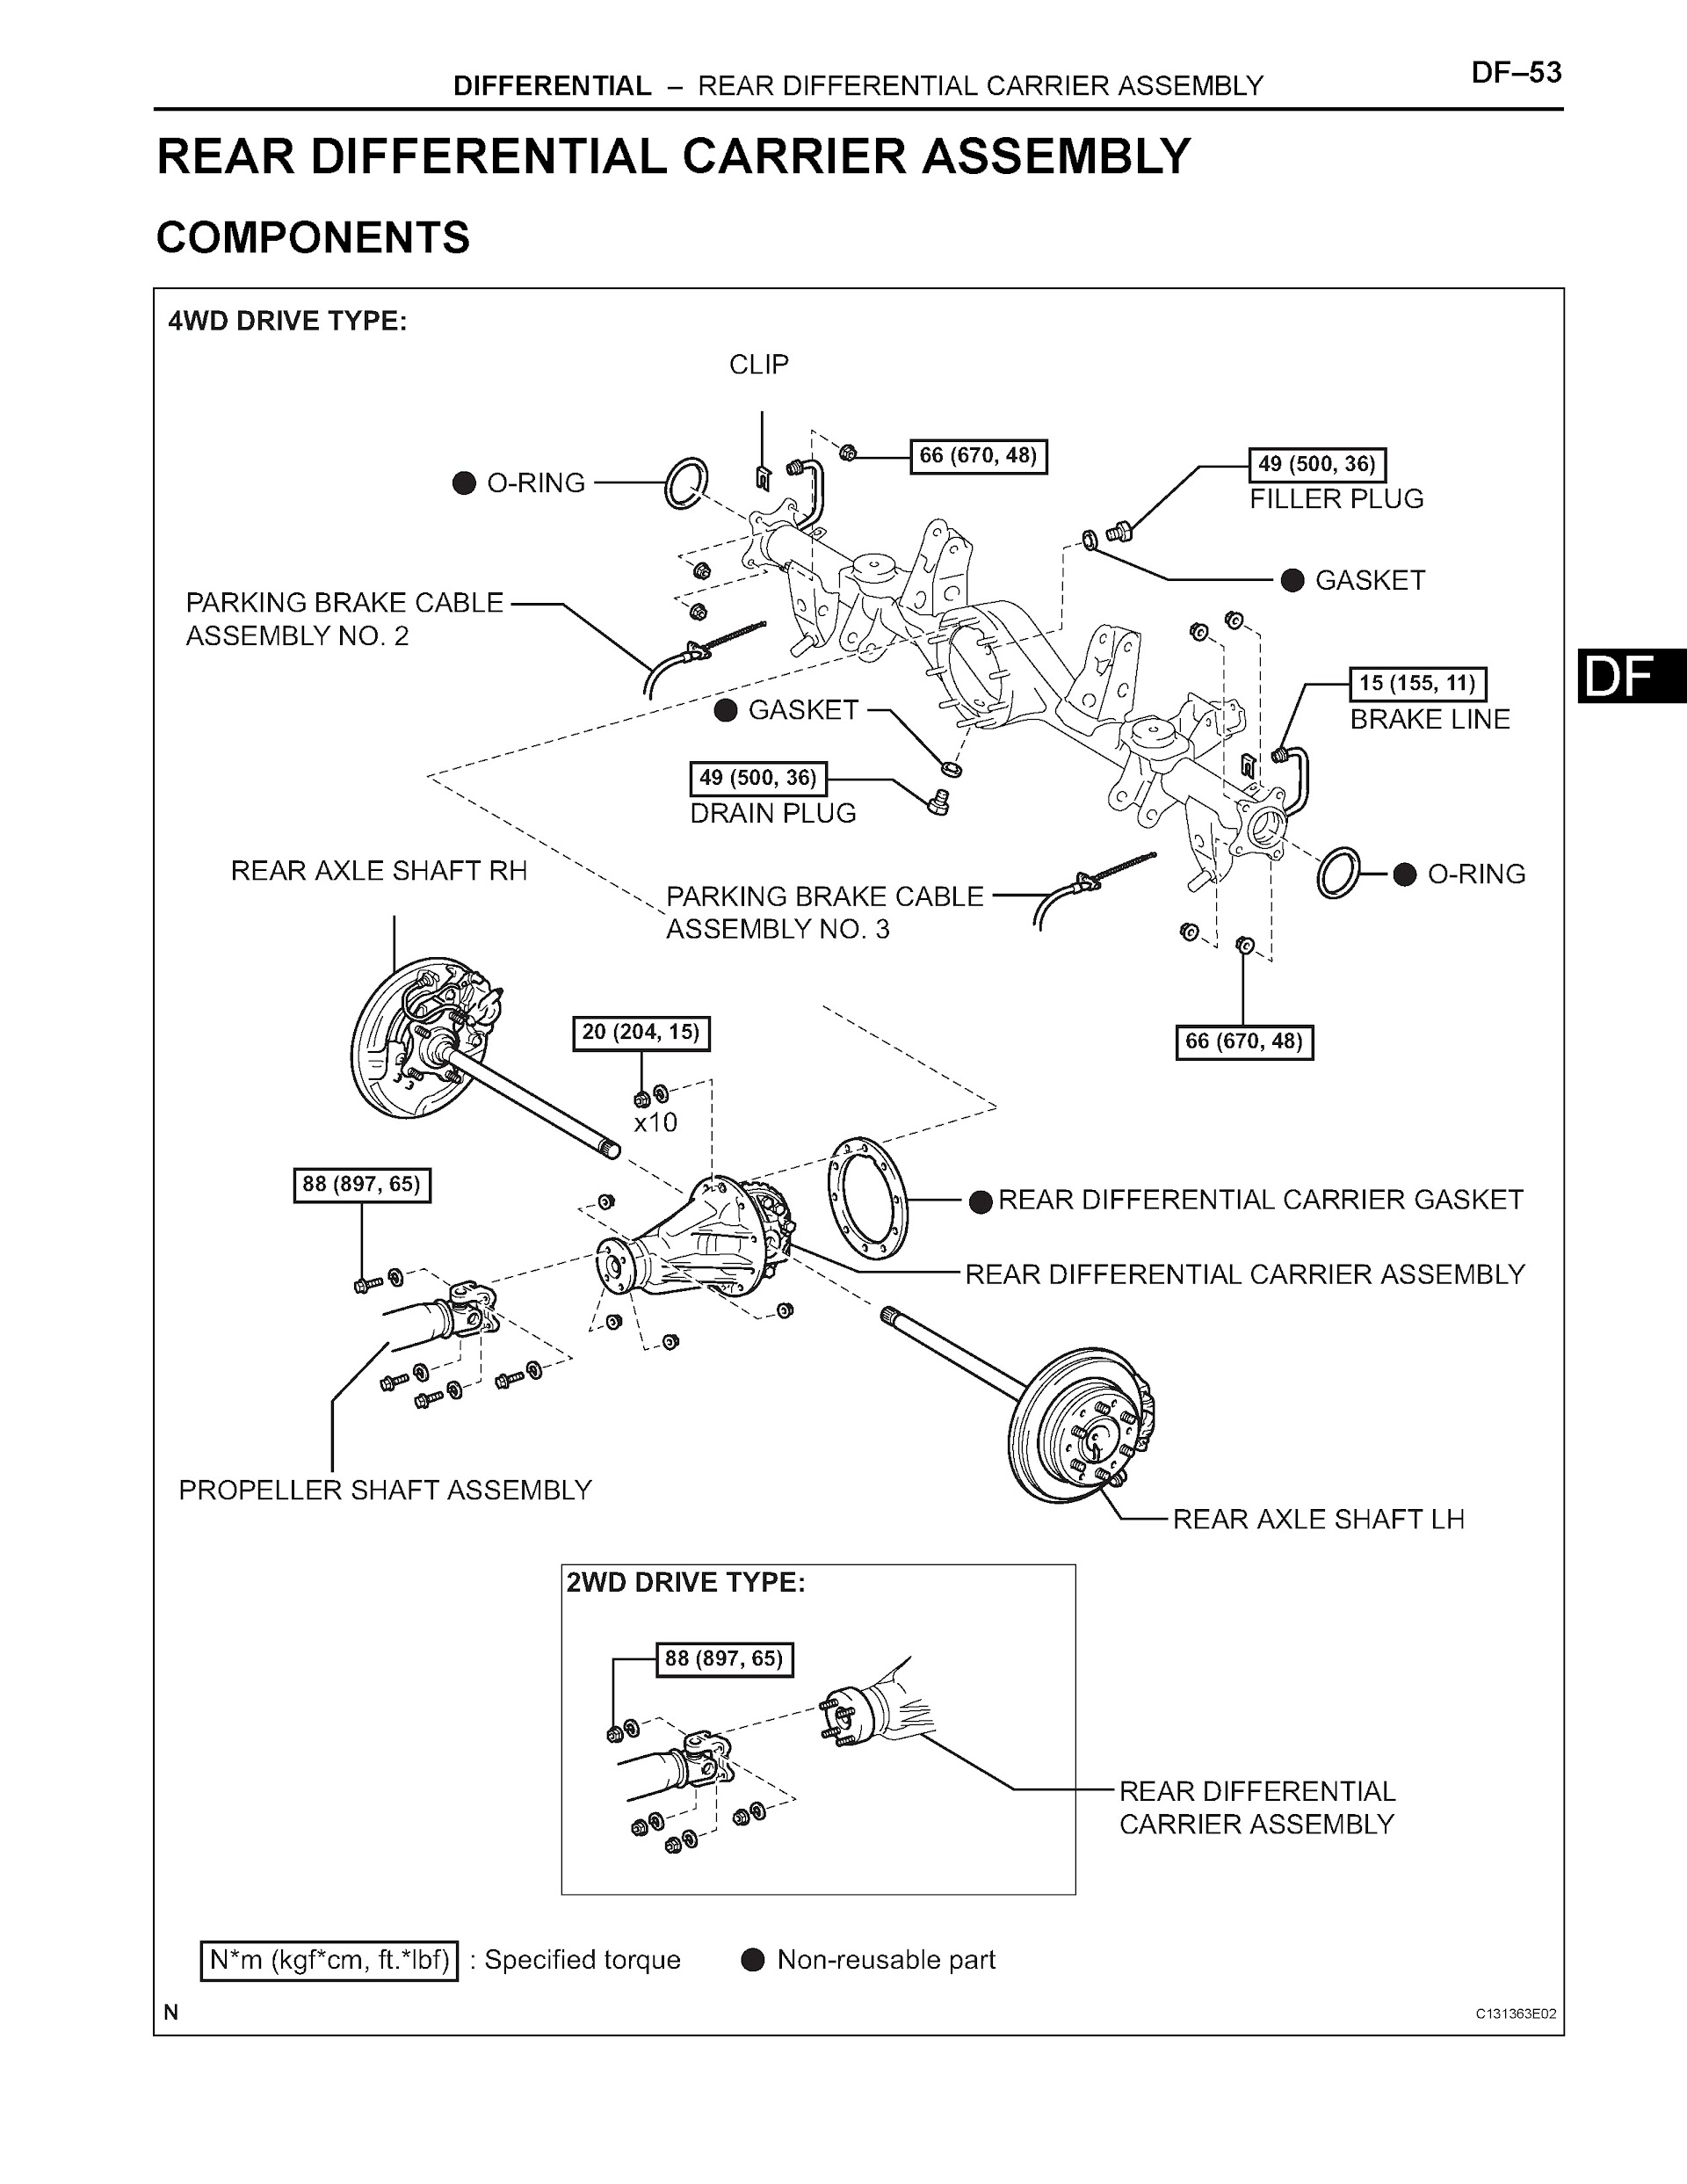 2006 Toyota 4Runner Repair Manual, Rear Differnetial Carrier Assembly